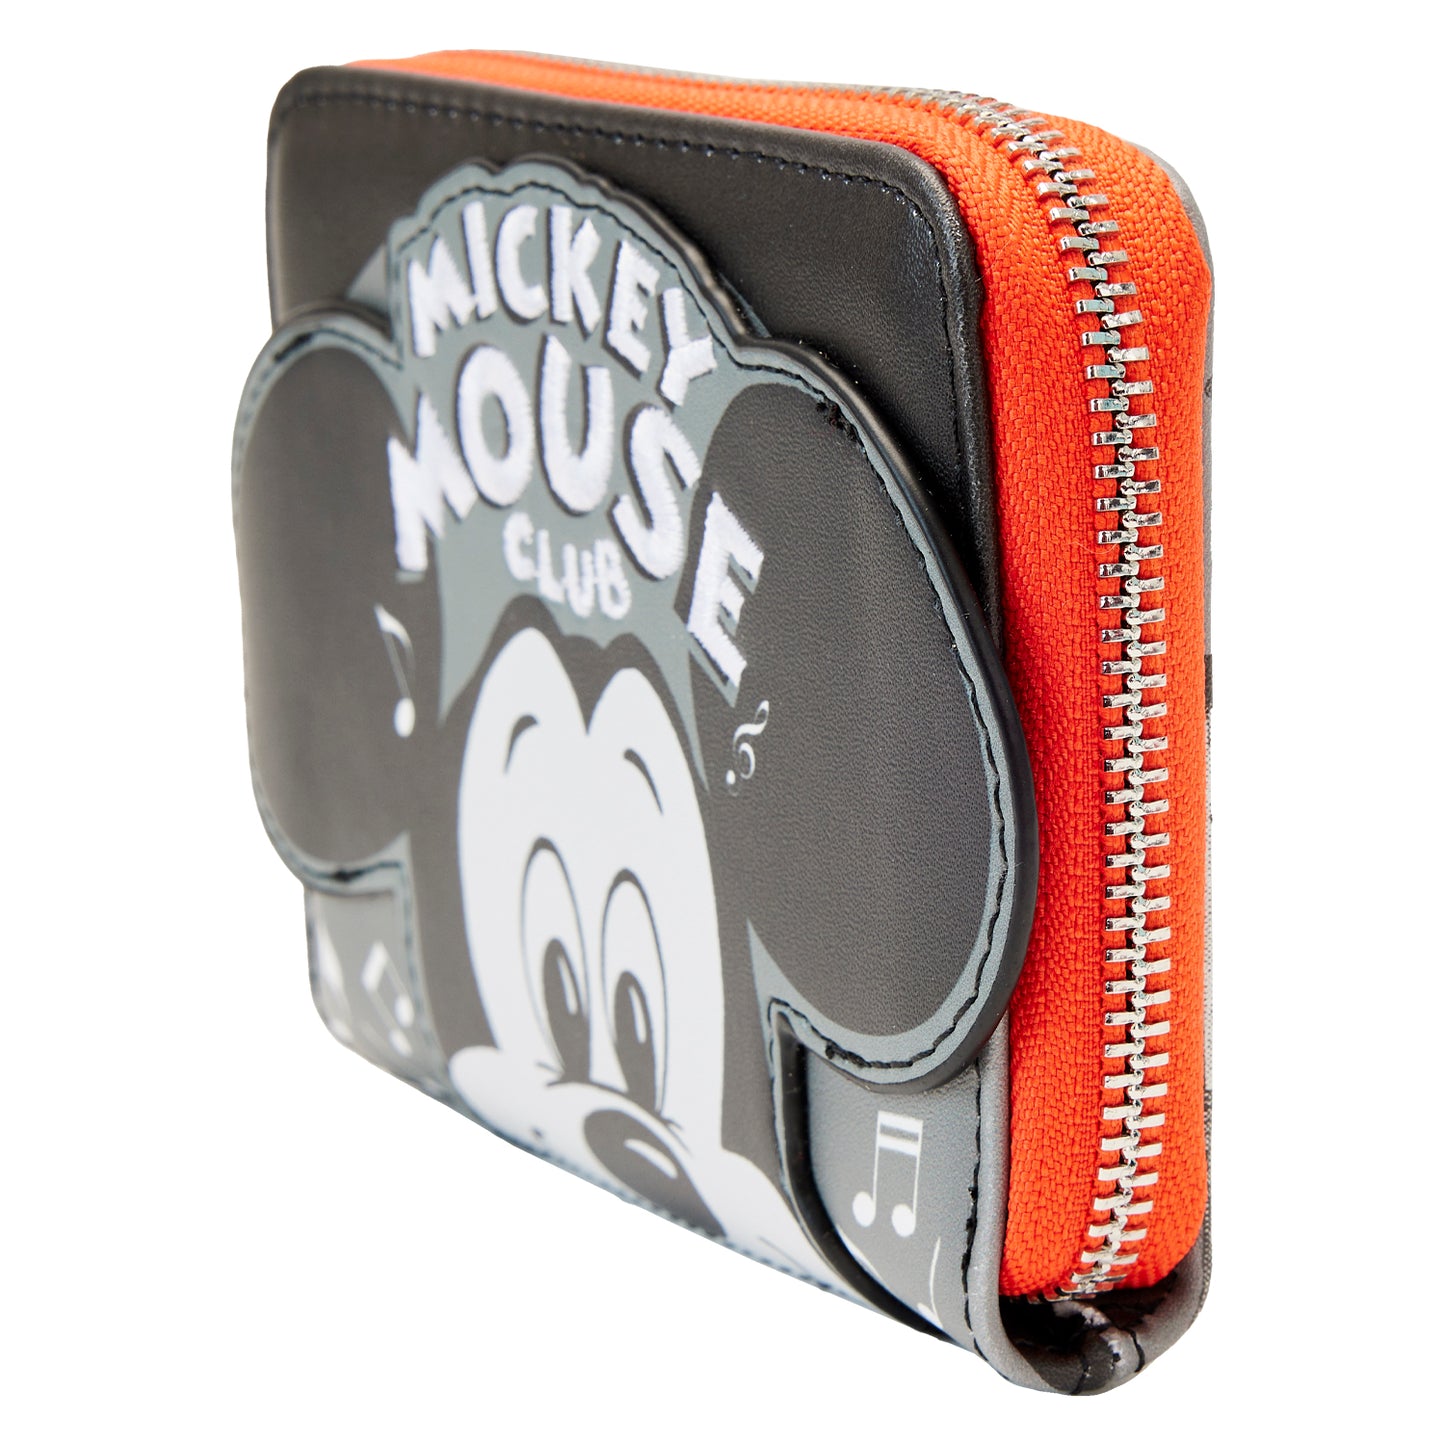 Loungefly Disney 100th Mickey Mouse Club Zip-Around Wallet